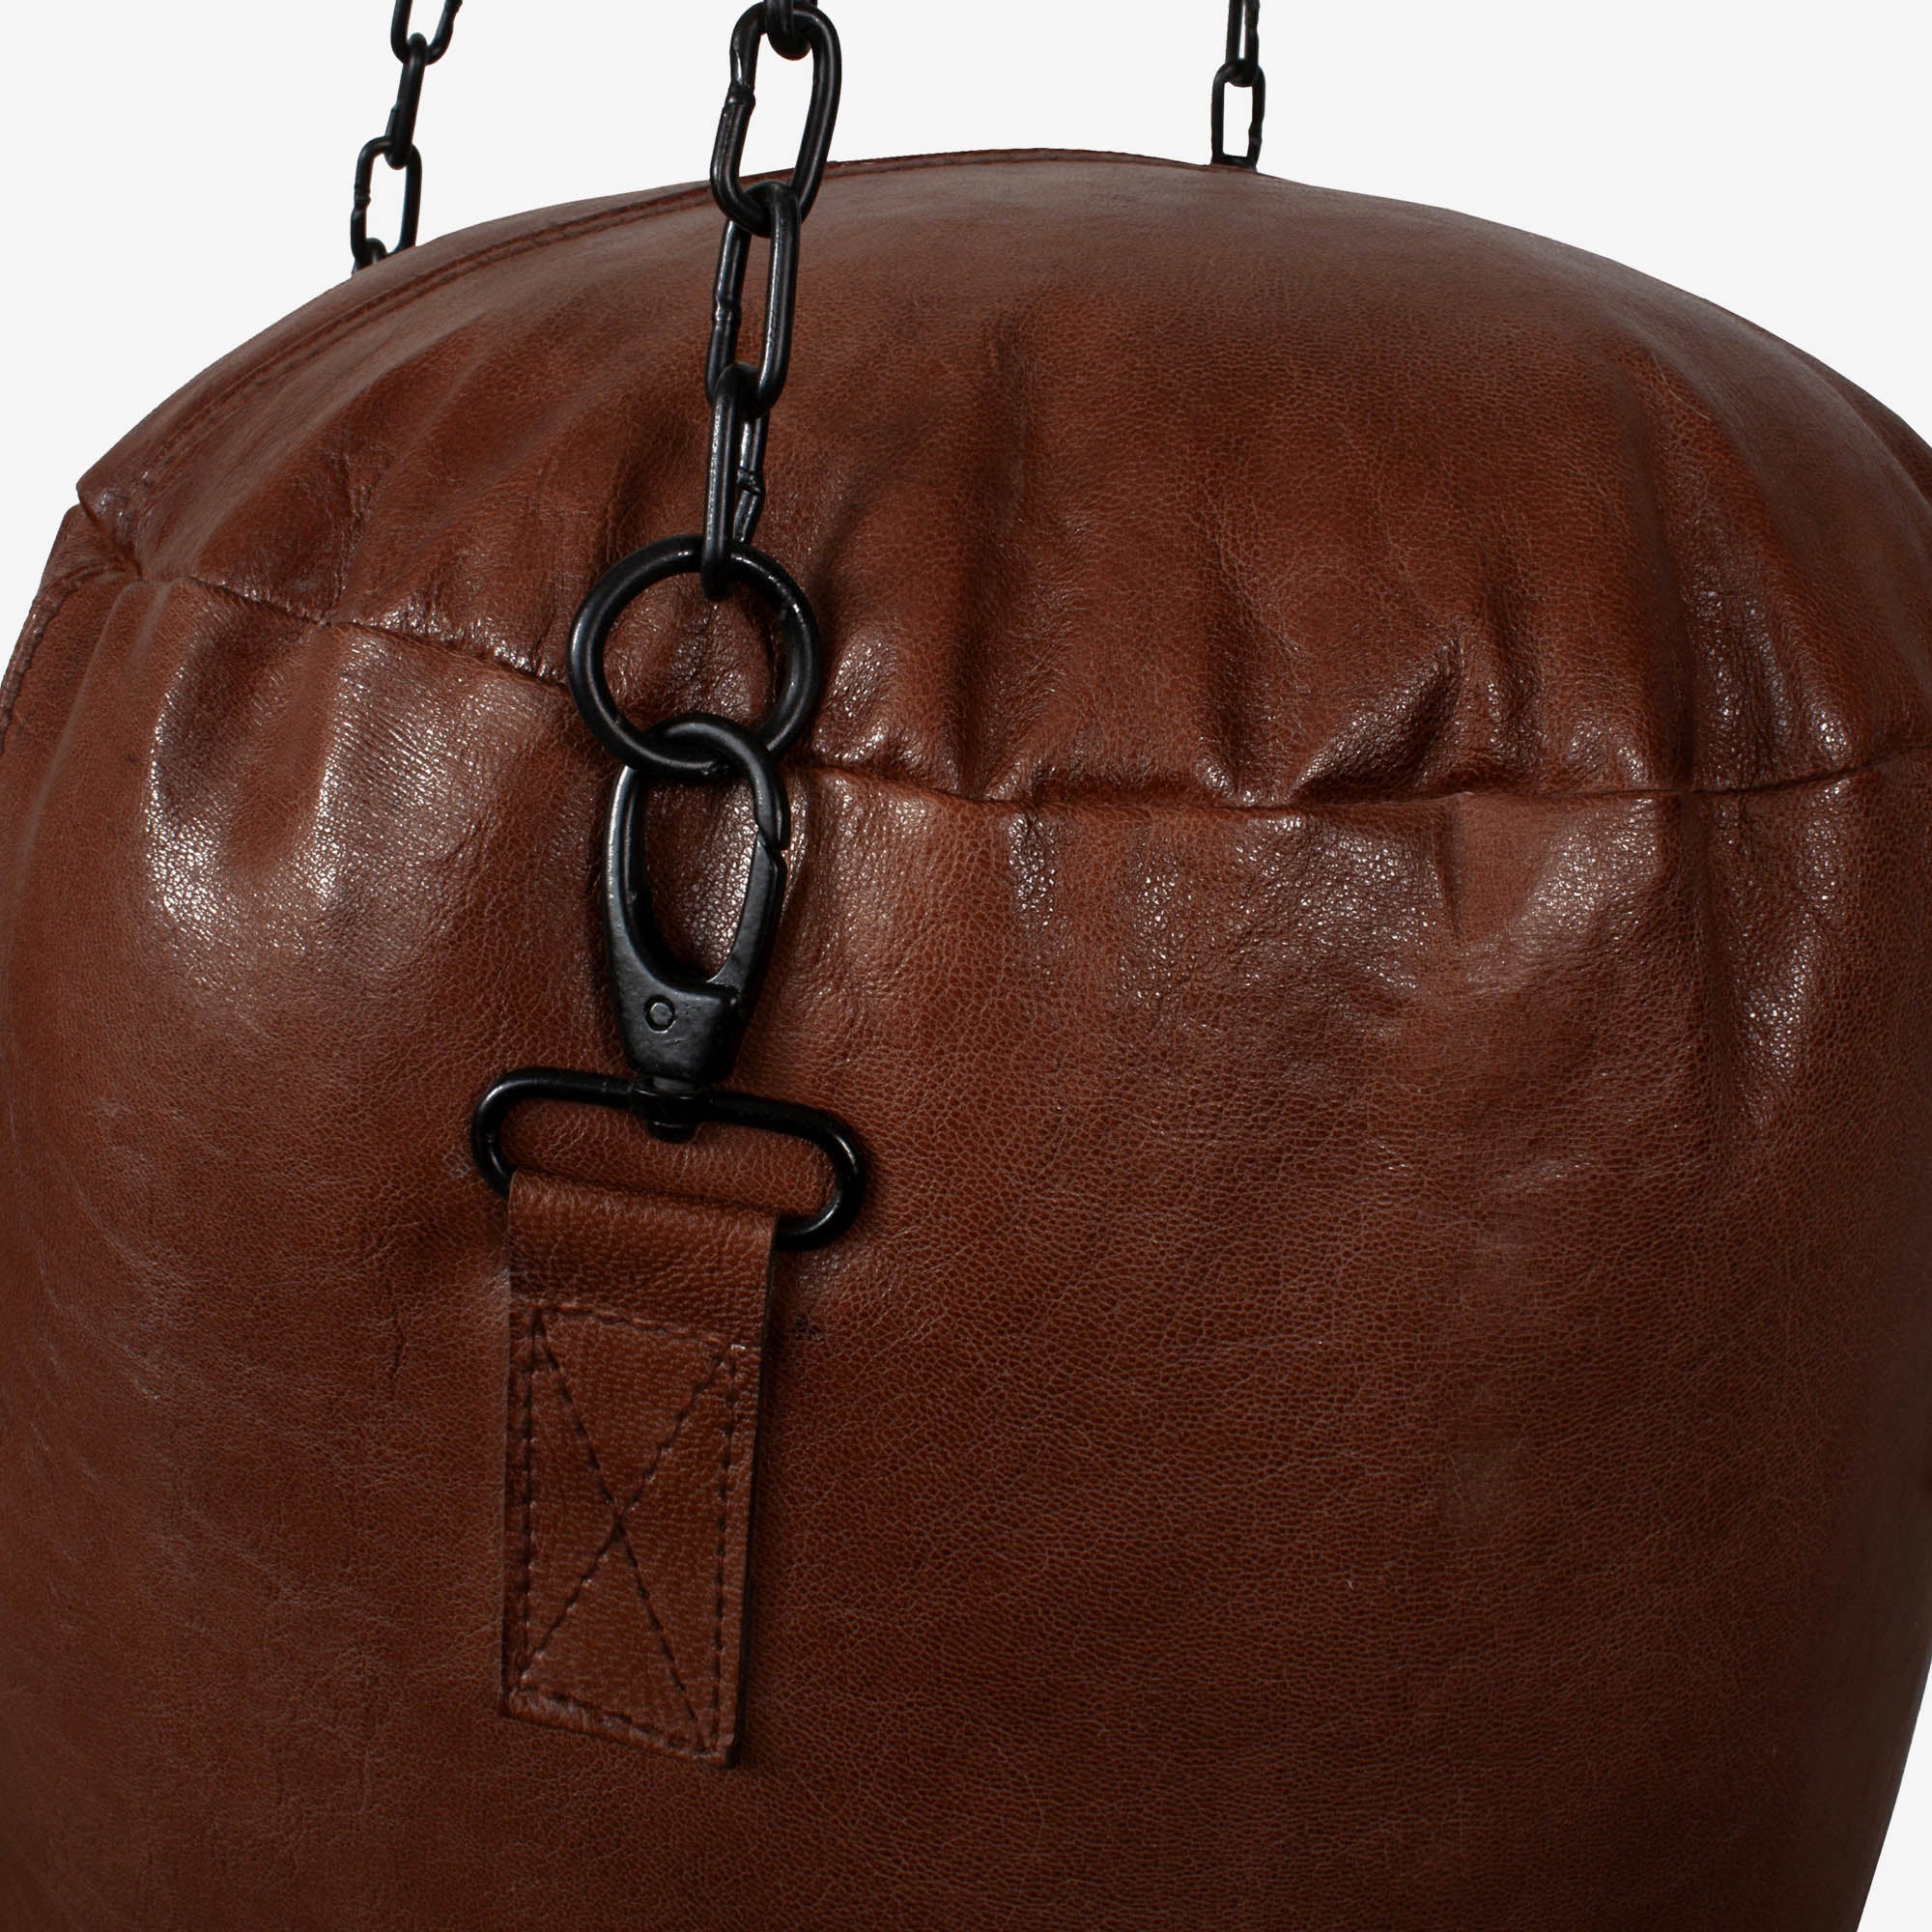 Leather punching bag small – small h39xdsn.21cm